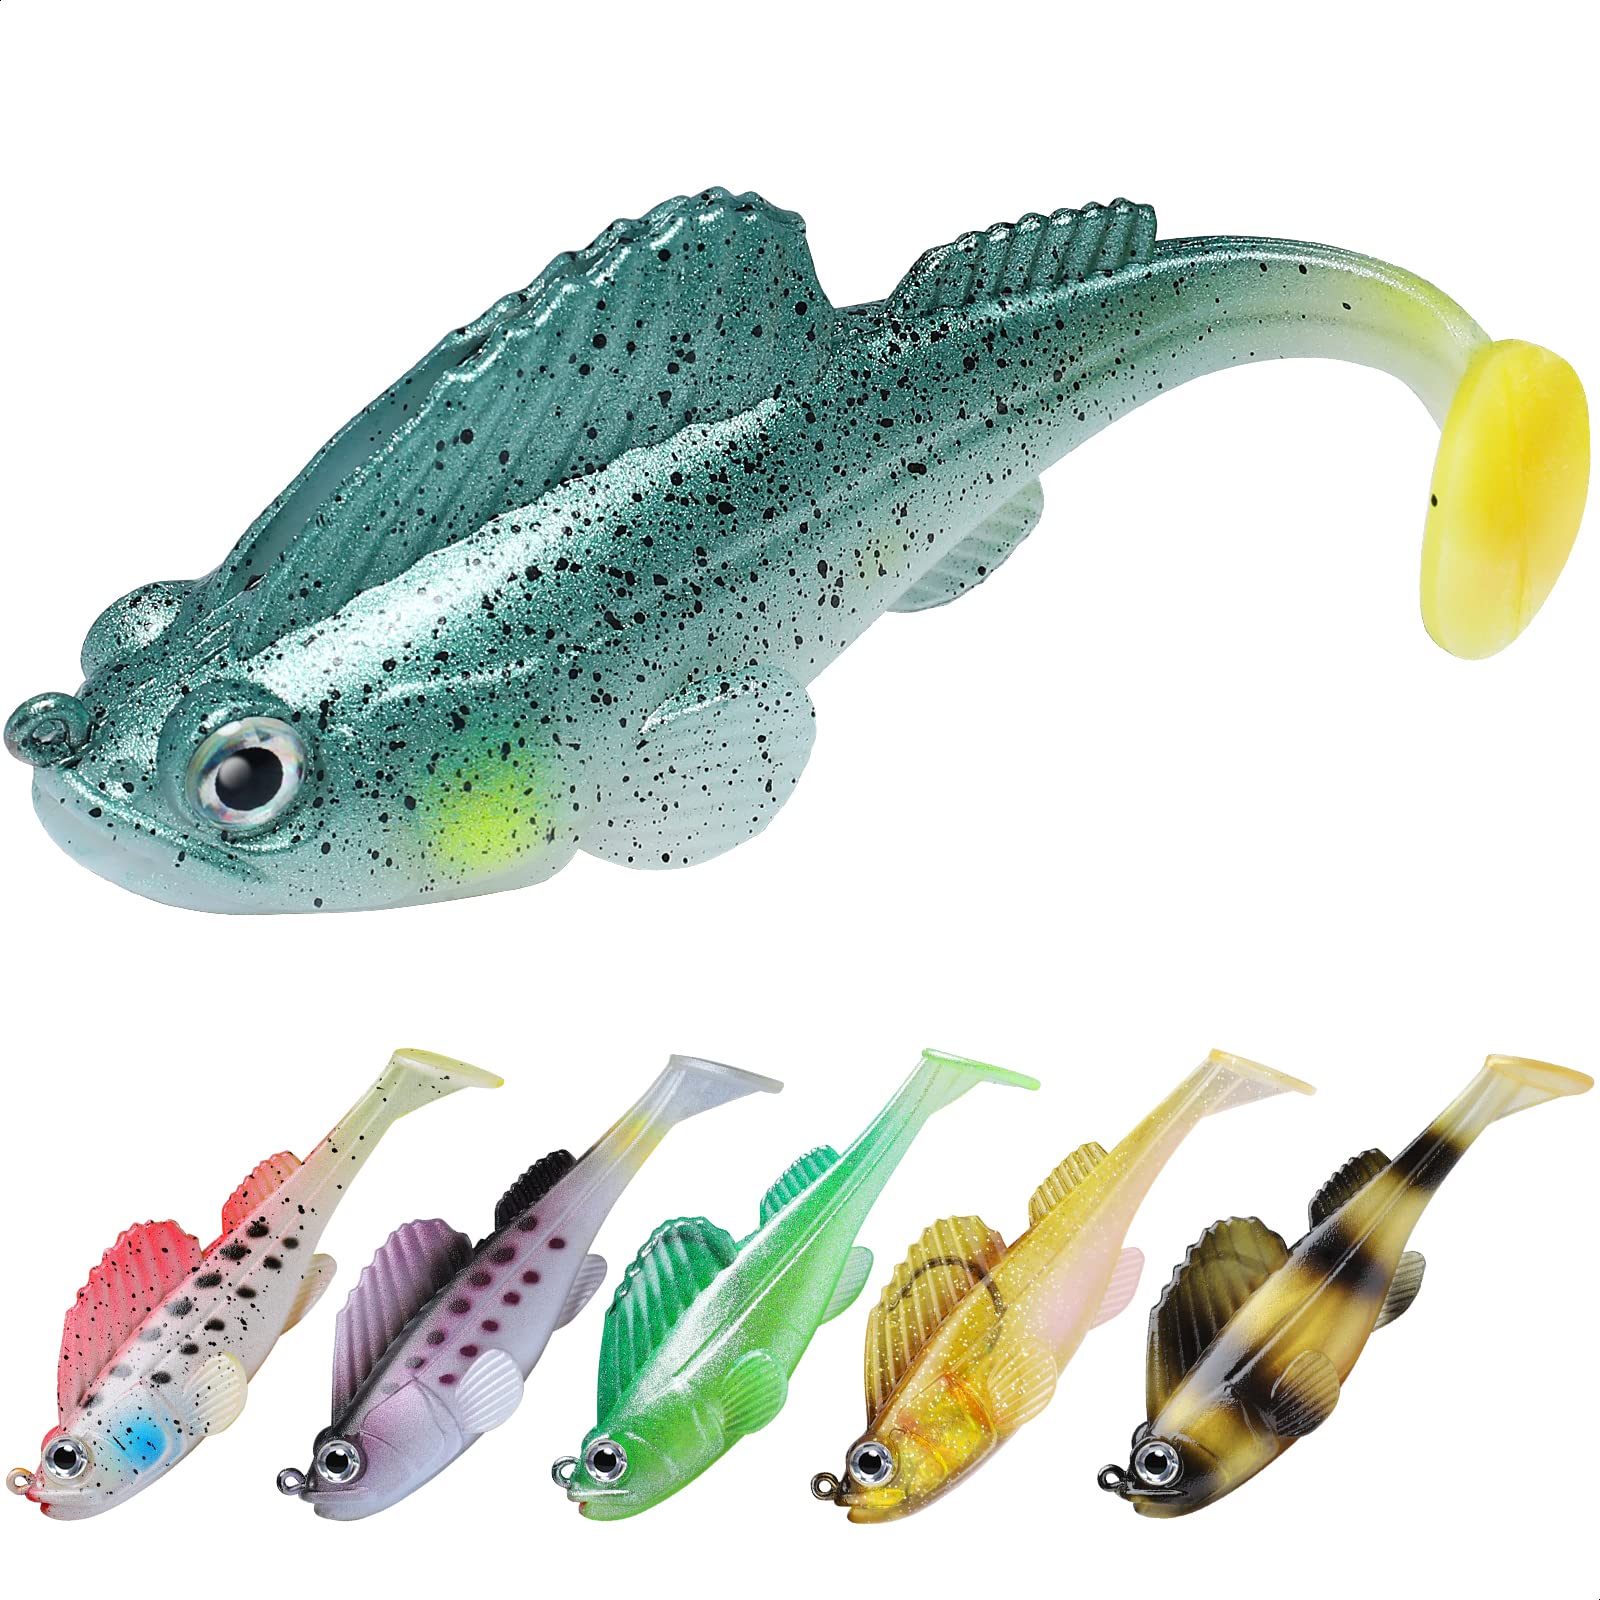 TRUSCEND Pre-Rigged Jig Head Soft Fishing Lures, Paddle Tail Swimbaits for  Bass Fishing, Shad or Tadpole Lure with Spinner, Premium Fishing Bait for  Saltwater Freshwater, Trout Crappie Fishing, Soft Plastic Lures 